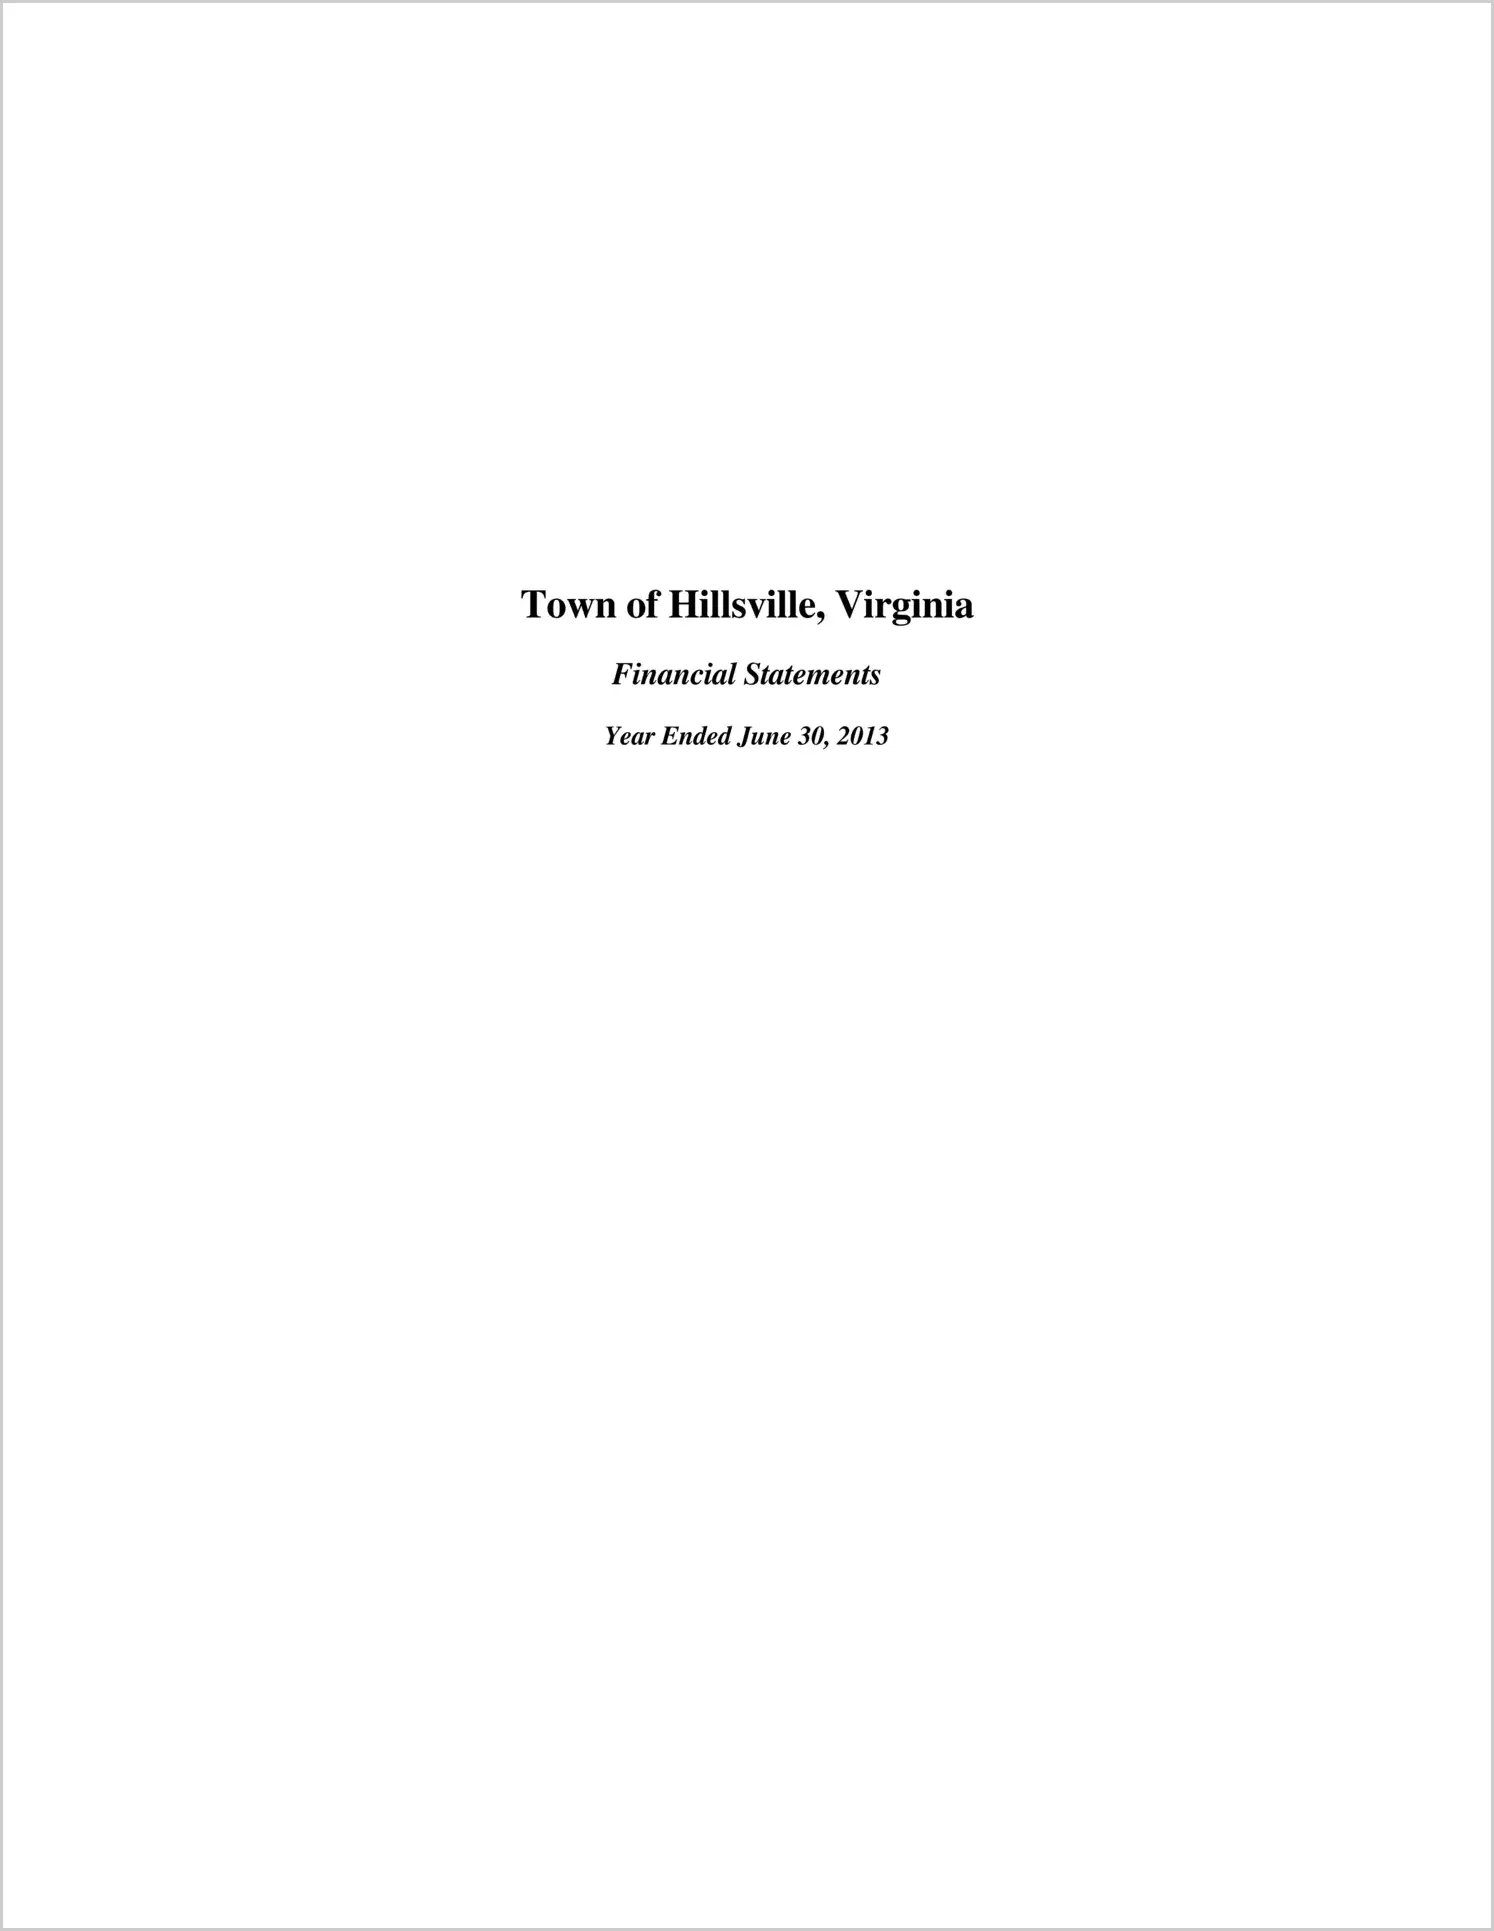 2013 Annual Financial Report for Town of Hillsville